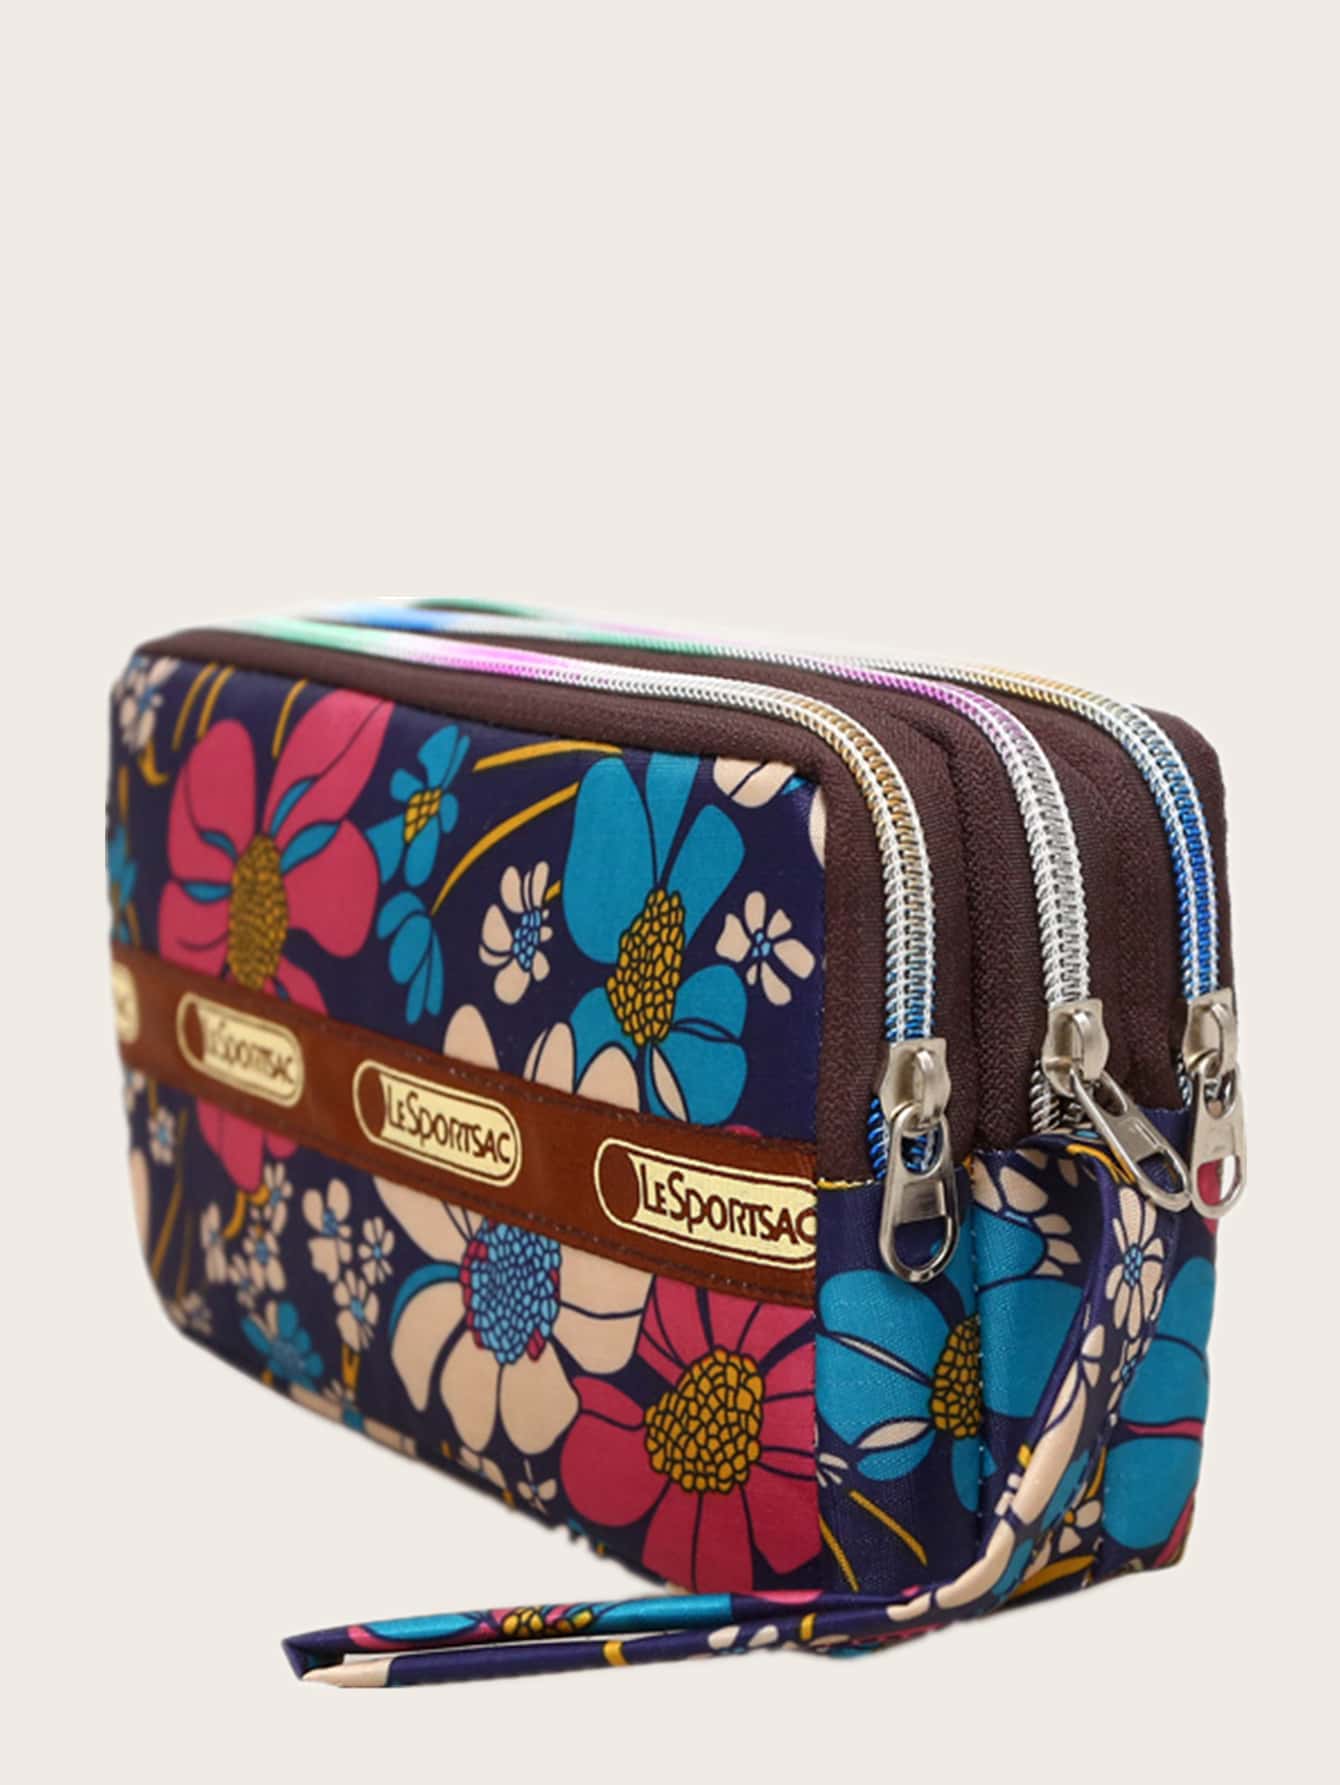 Floral Graphic Clutch Bag With Wristlet